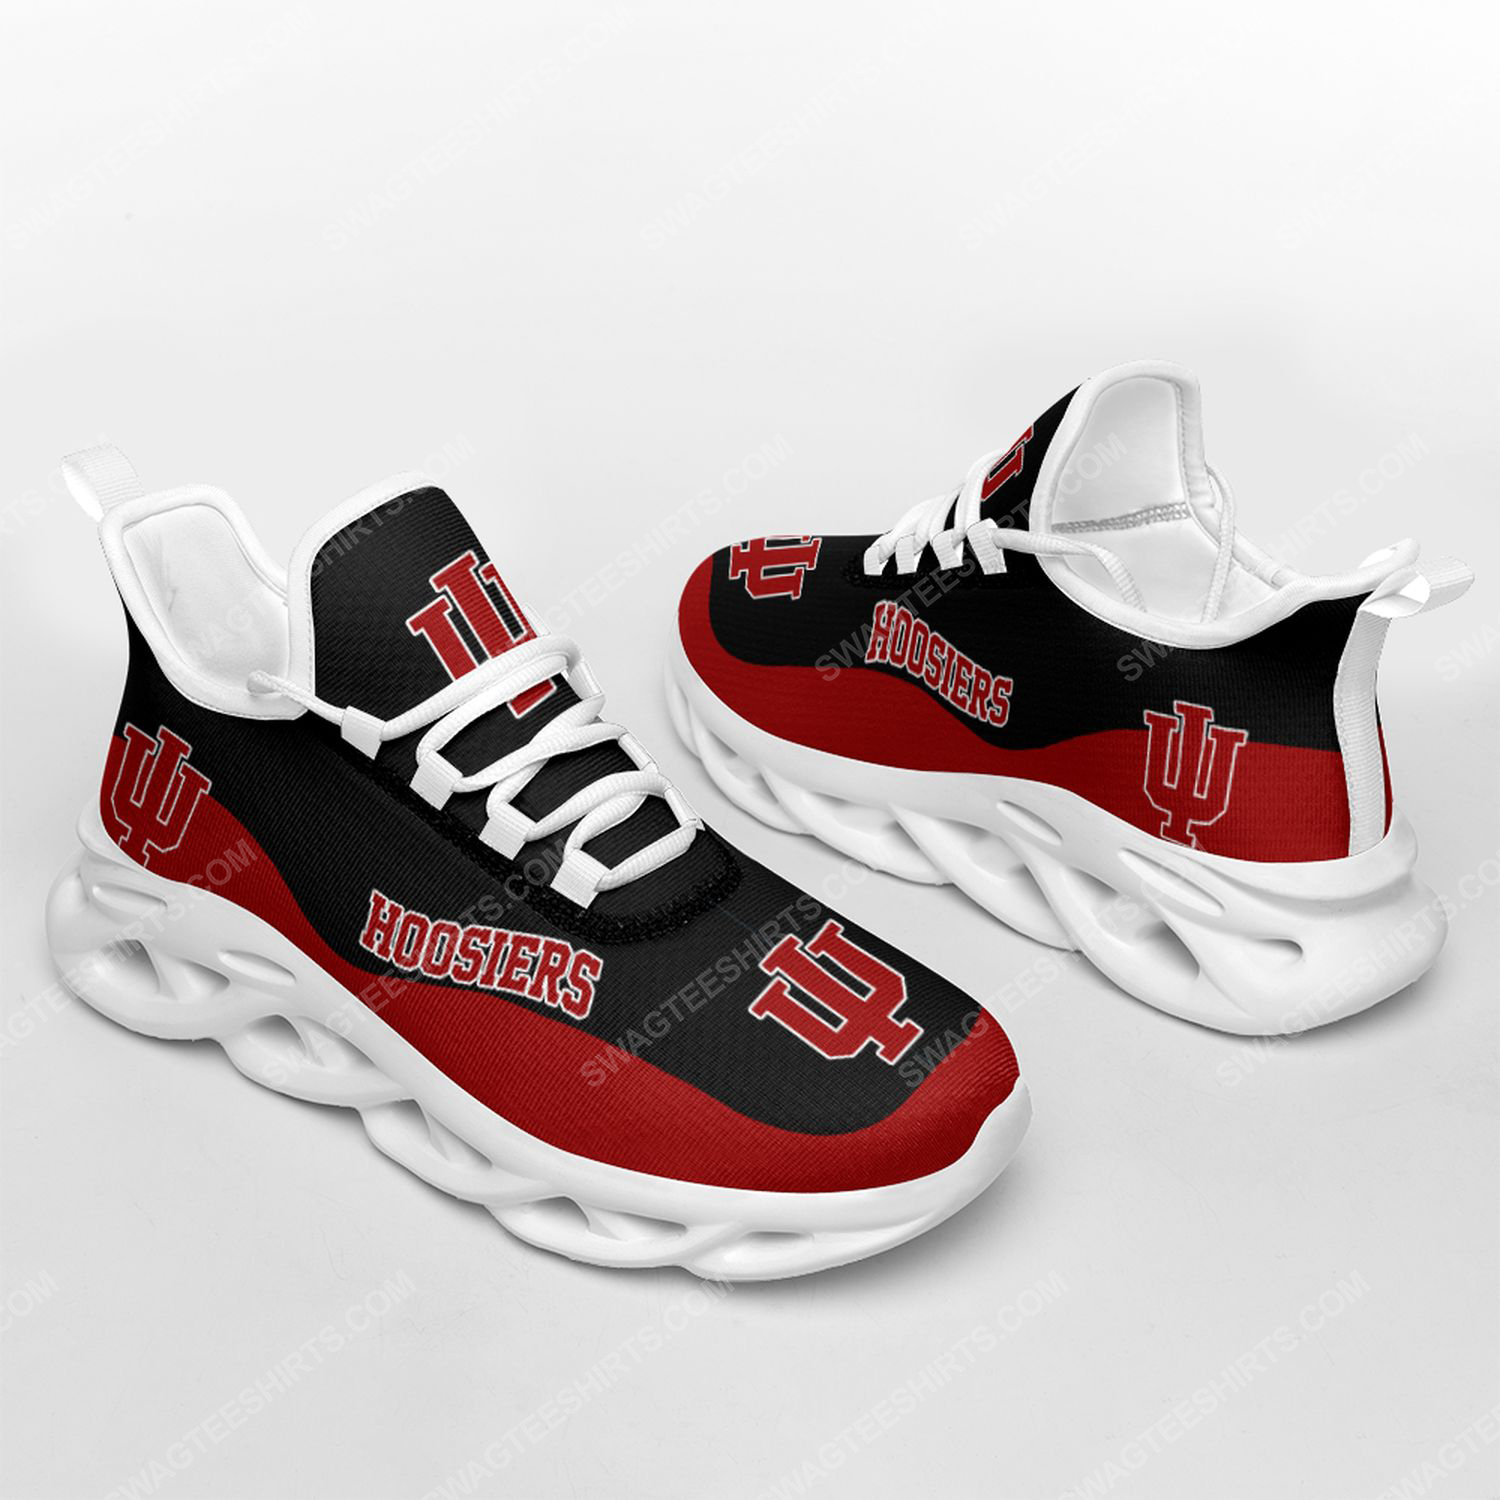 [special edition] The indiana hoosiers football team max soul shoes – Maria